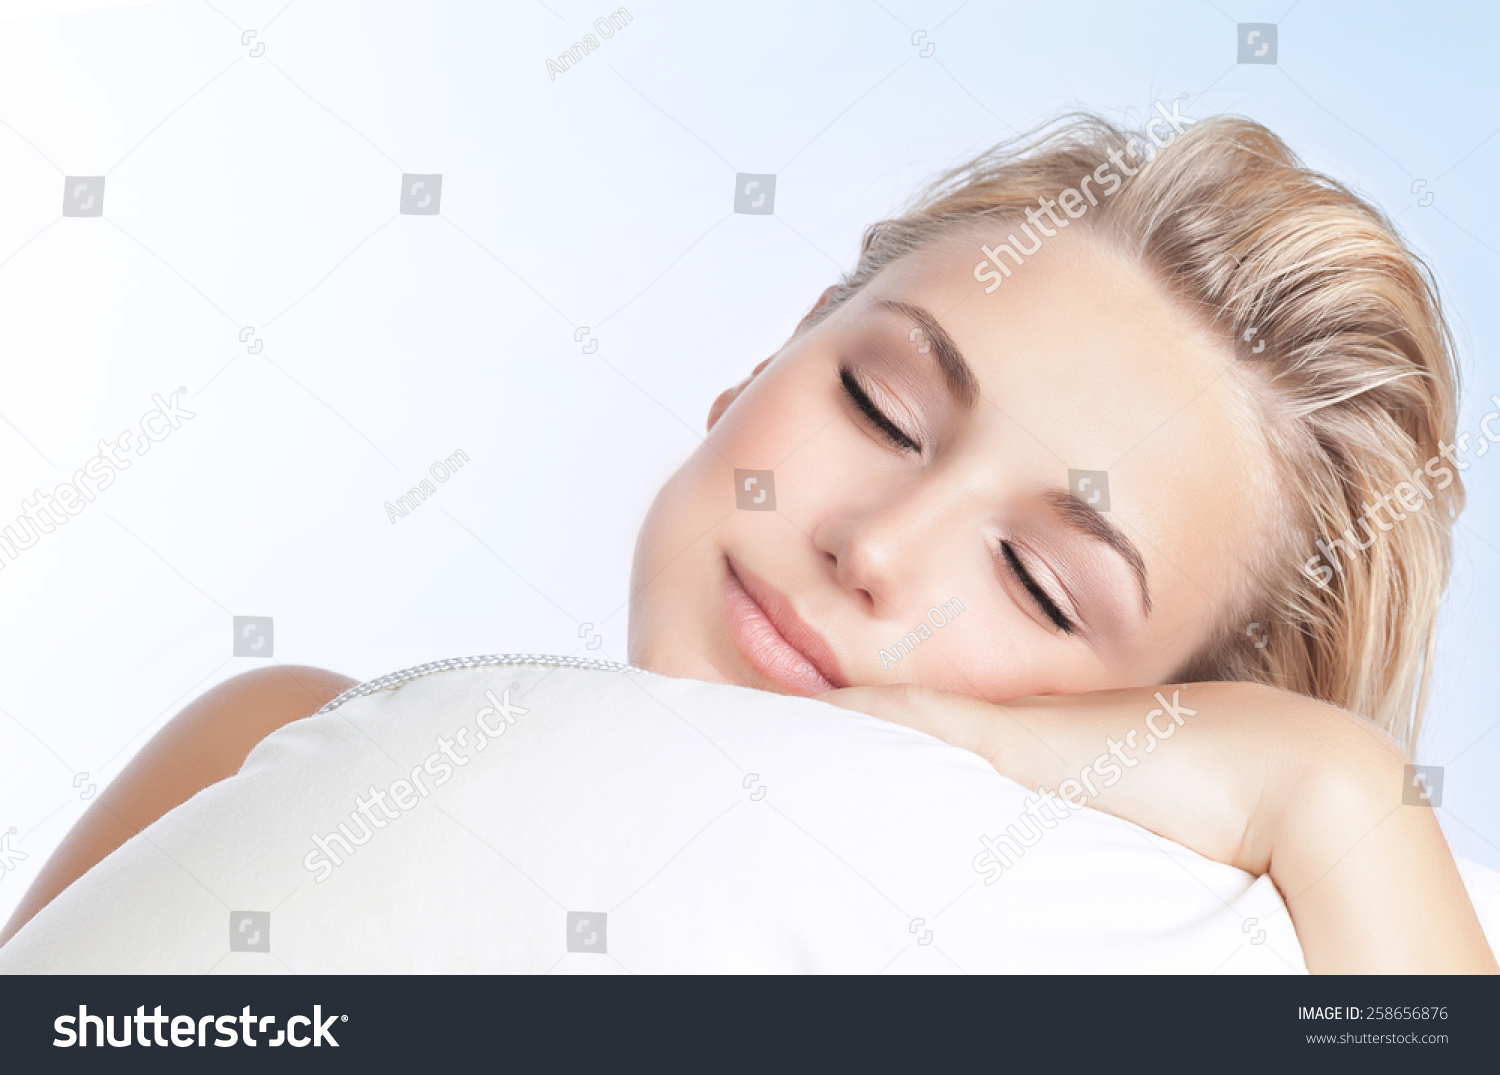 Closeup Portrait Of Beautiful Woman Sleeping On The Pillow Isolated On Blue And White Background